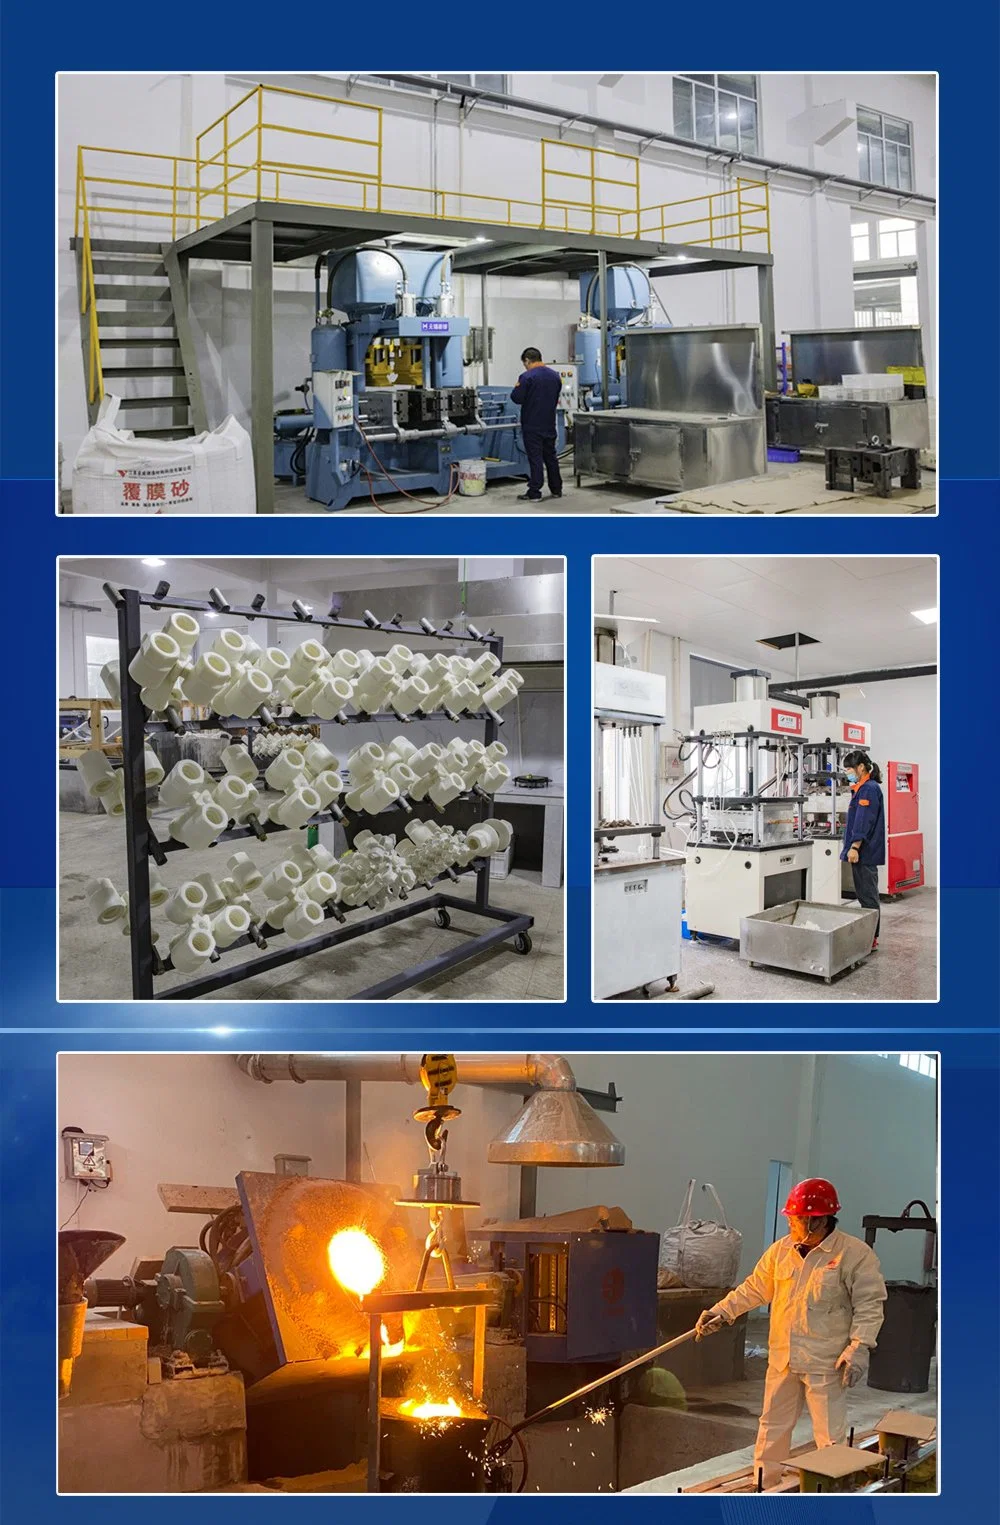 Machining, Equipment, Lighting, Construction, Power Fitting, Nuts, Underground, Accessories, E-Coated